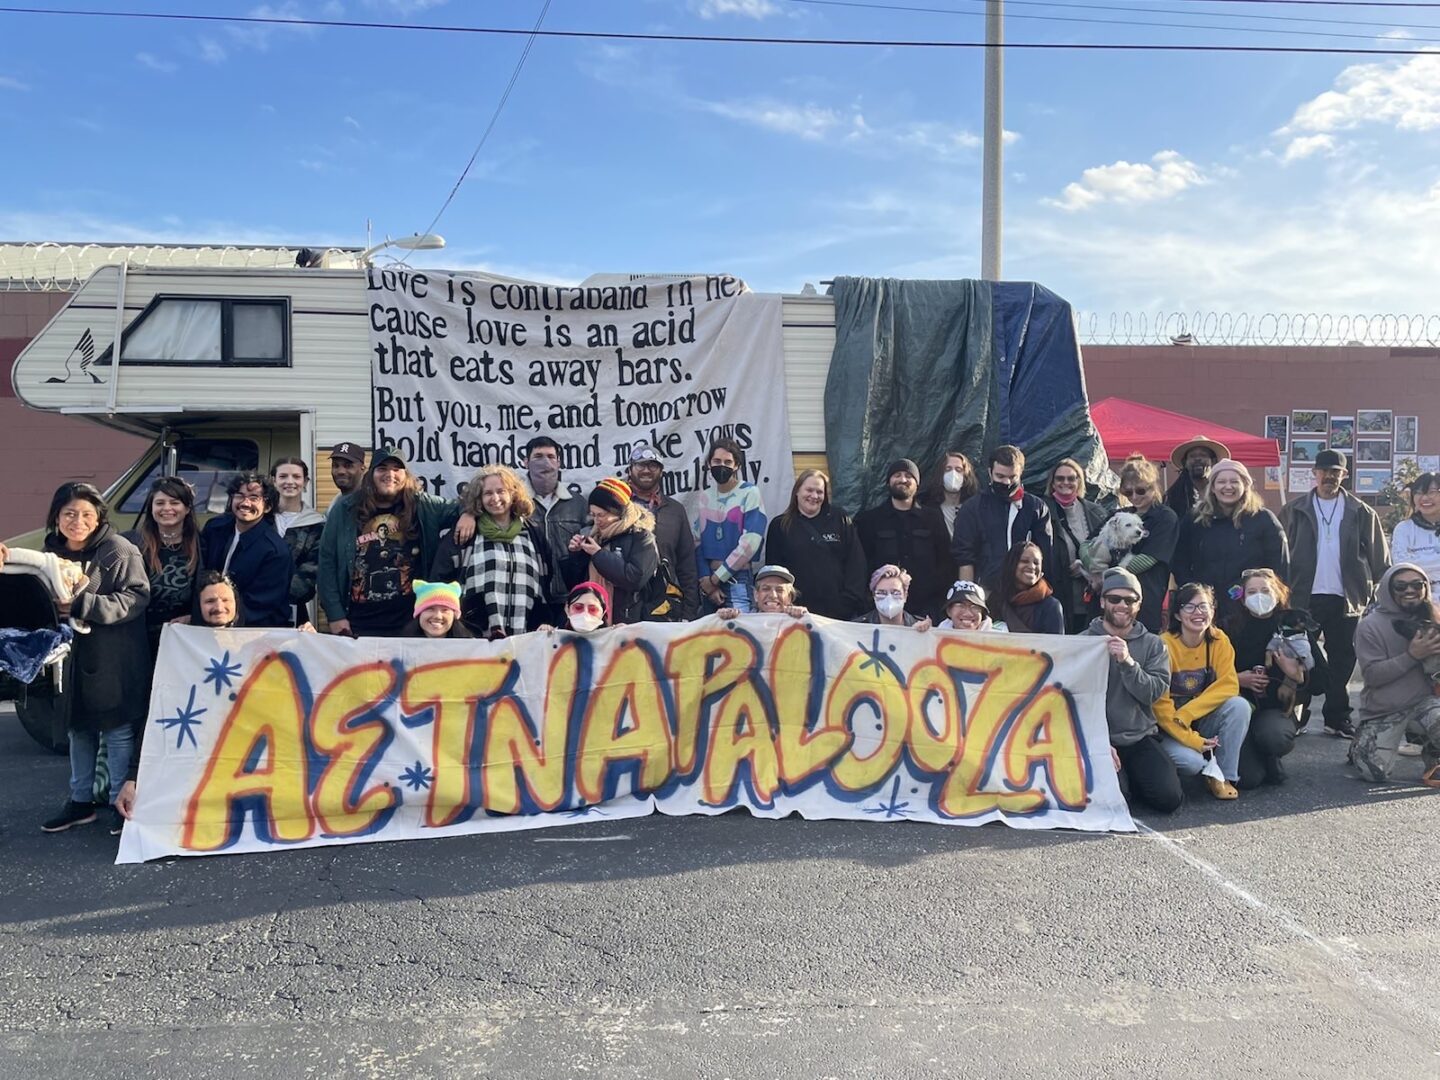 Around 30 people stand in front of an RV in the daytime with a sign that reads "Aetnapalooza."